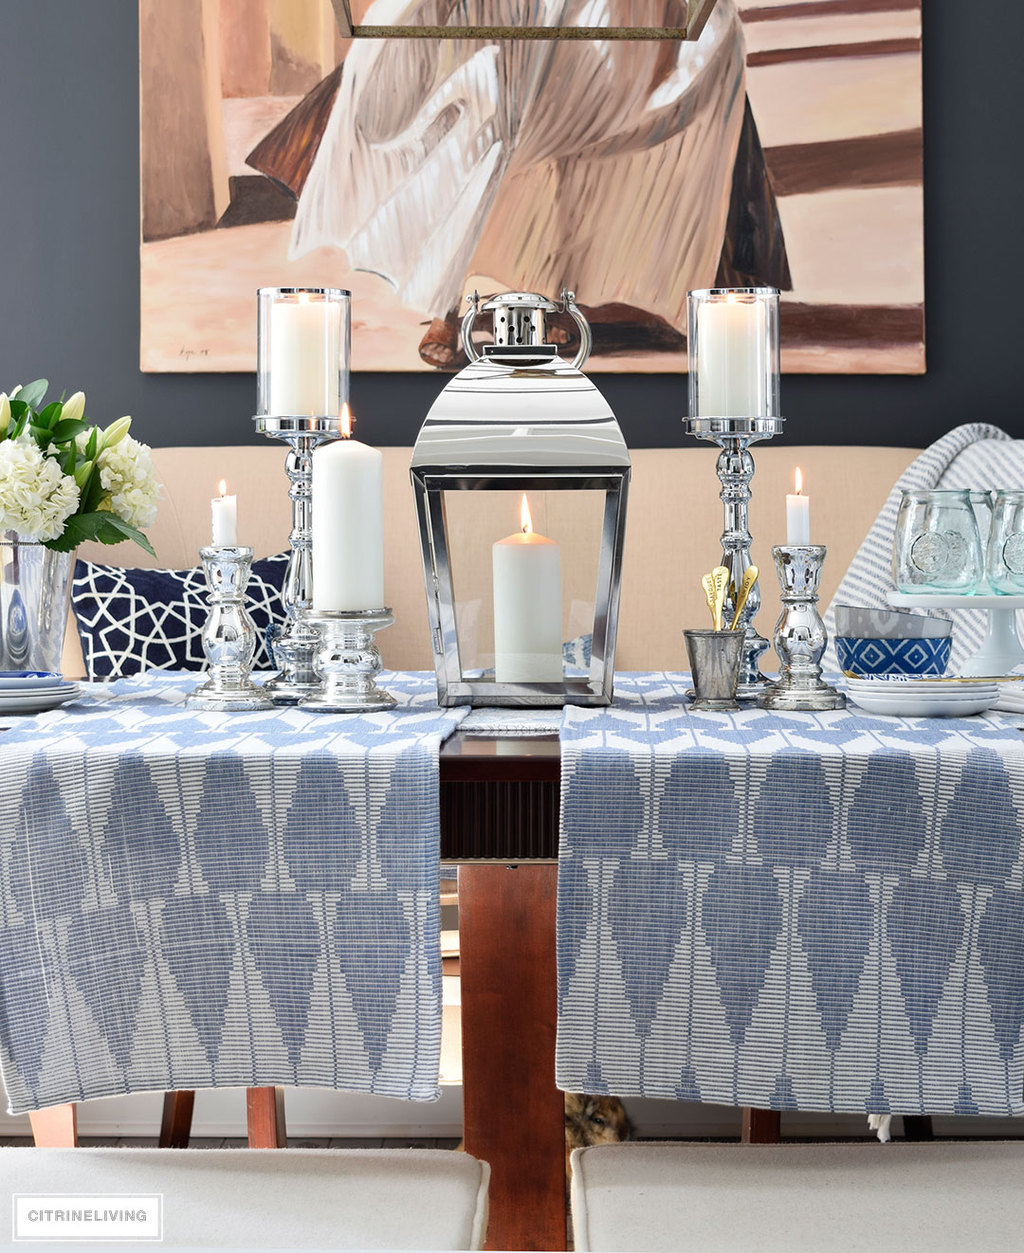 Beautiful Spring table decor - a fresh mix of blue and white pattern and texture is perfect for the season.